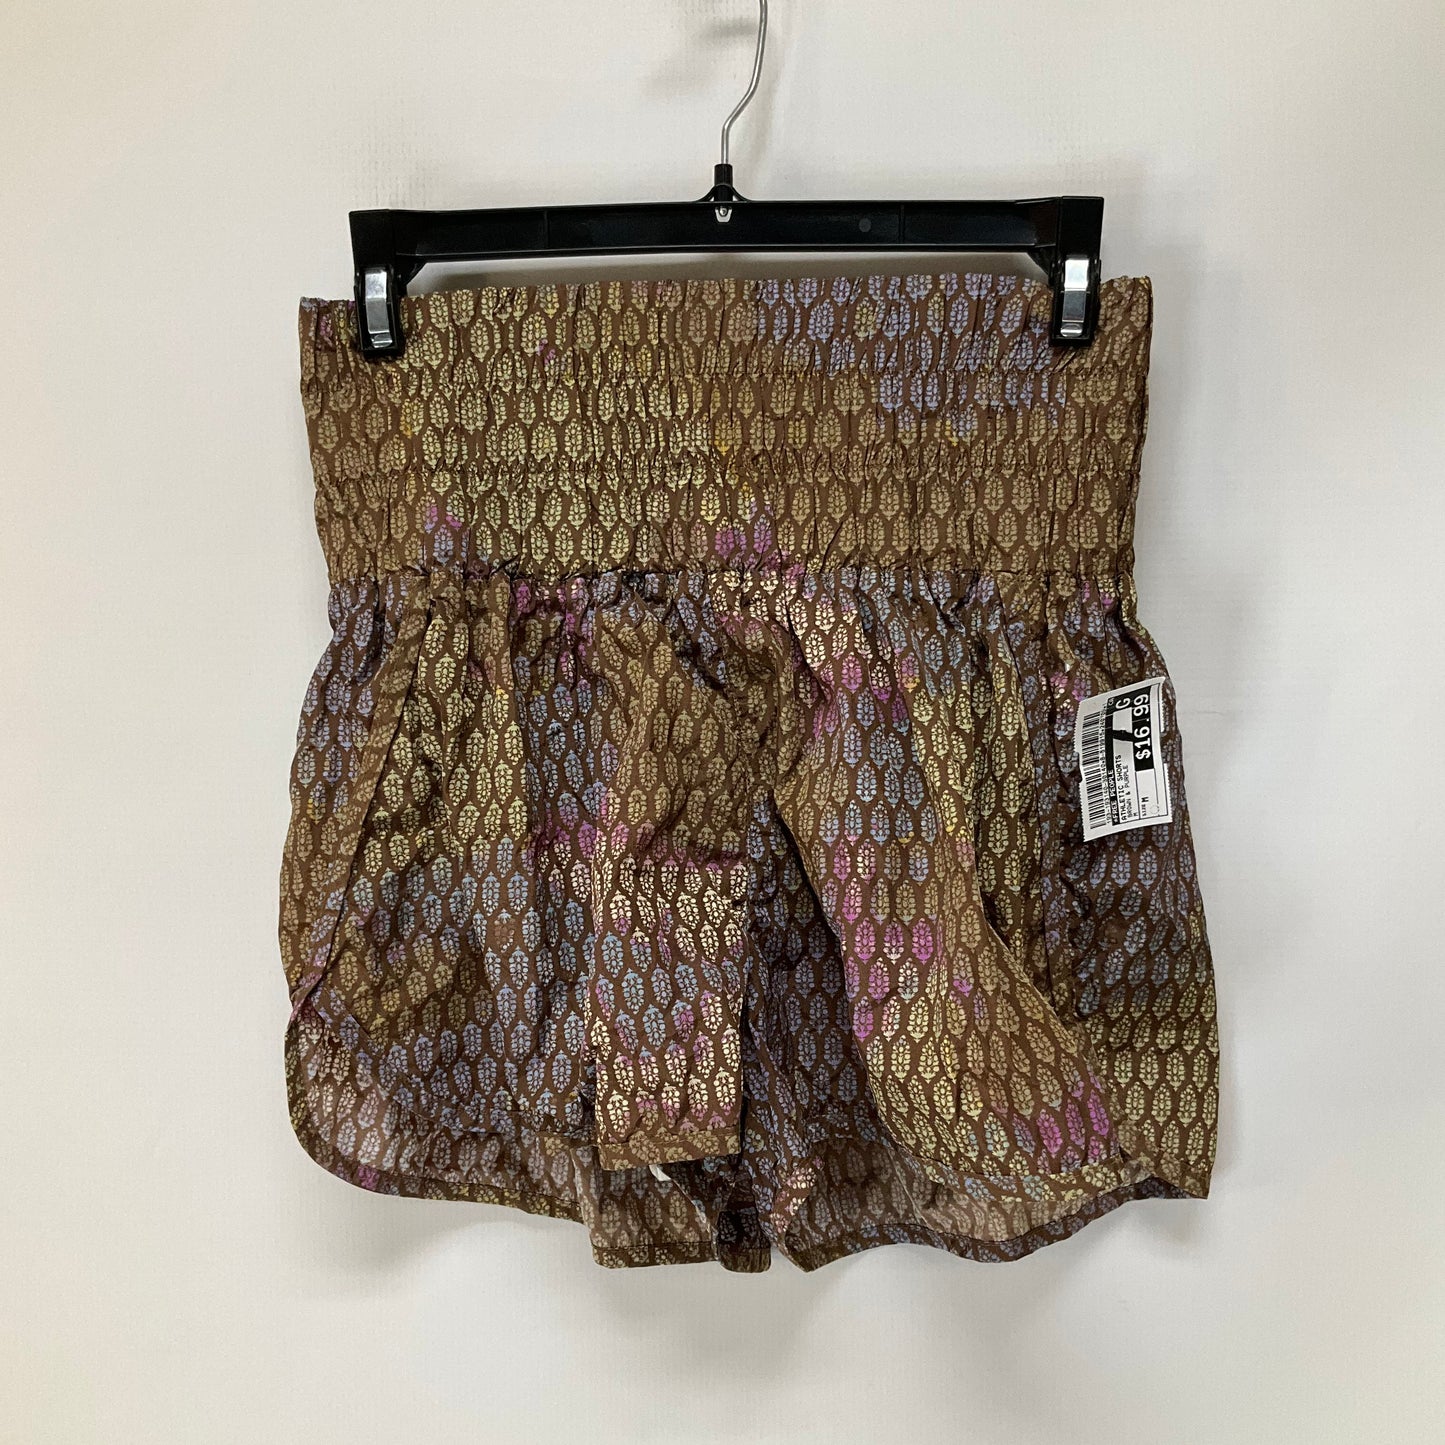 Brown & Purple Athletic Shorts Free People, Size M